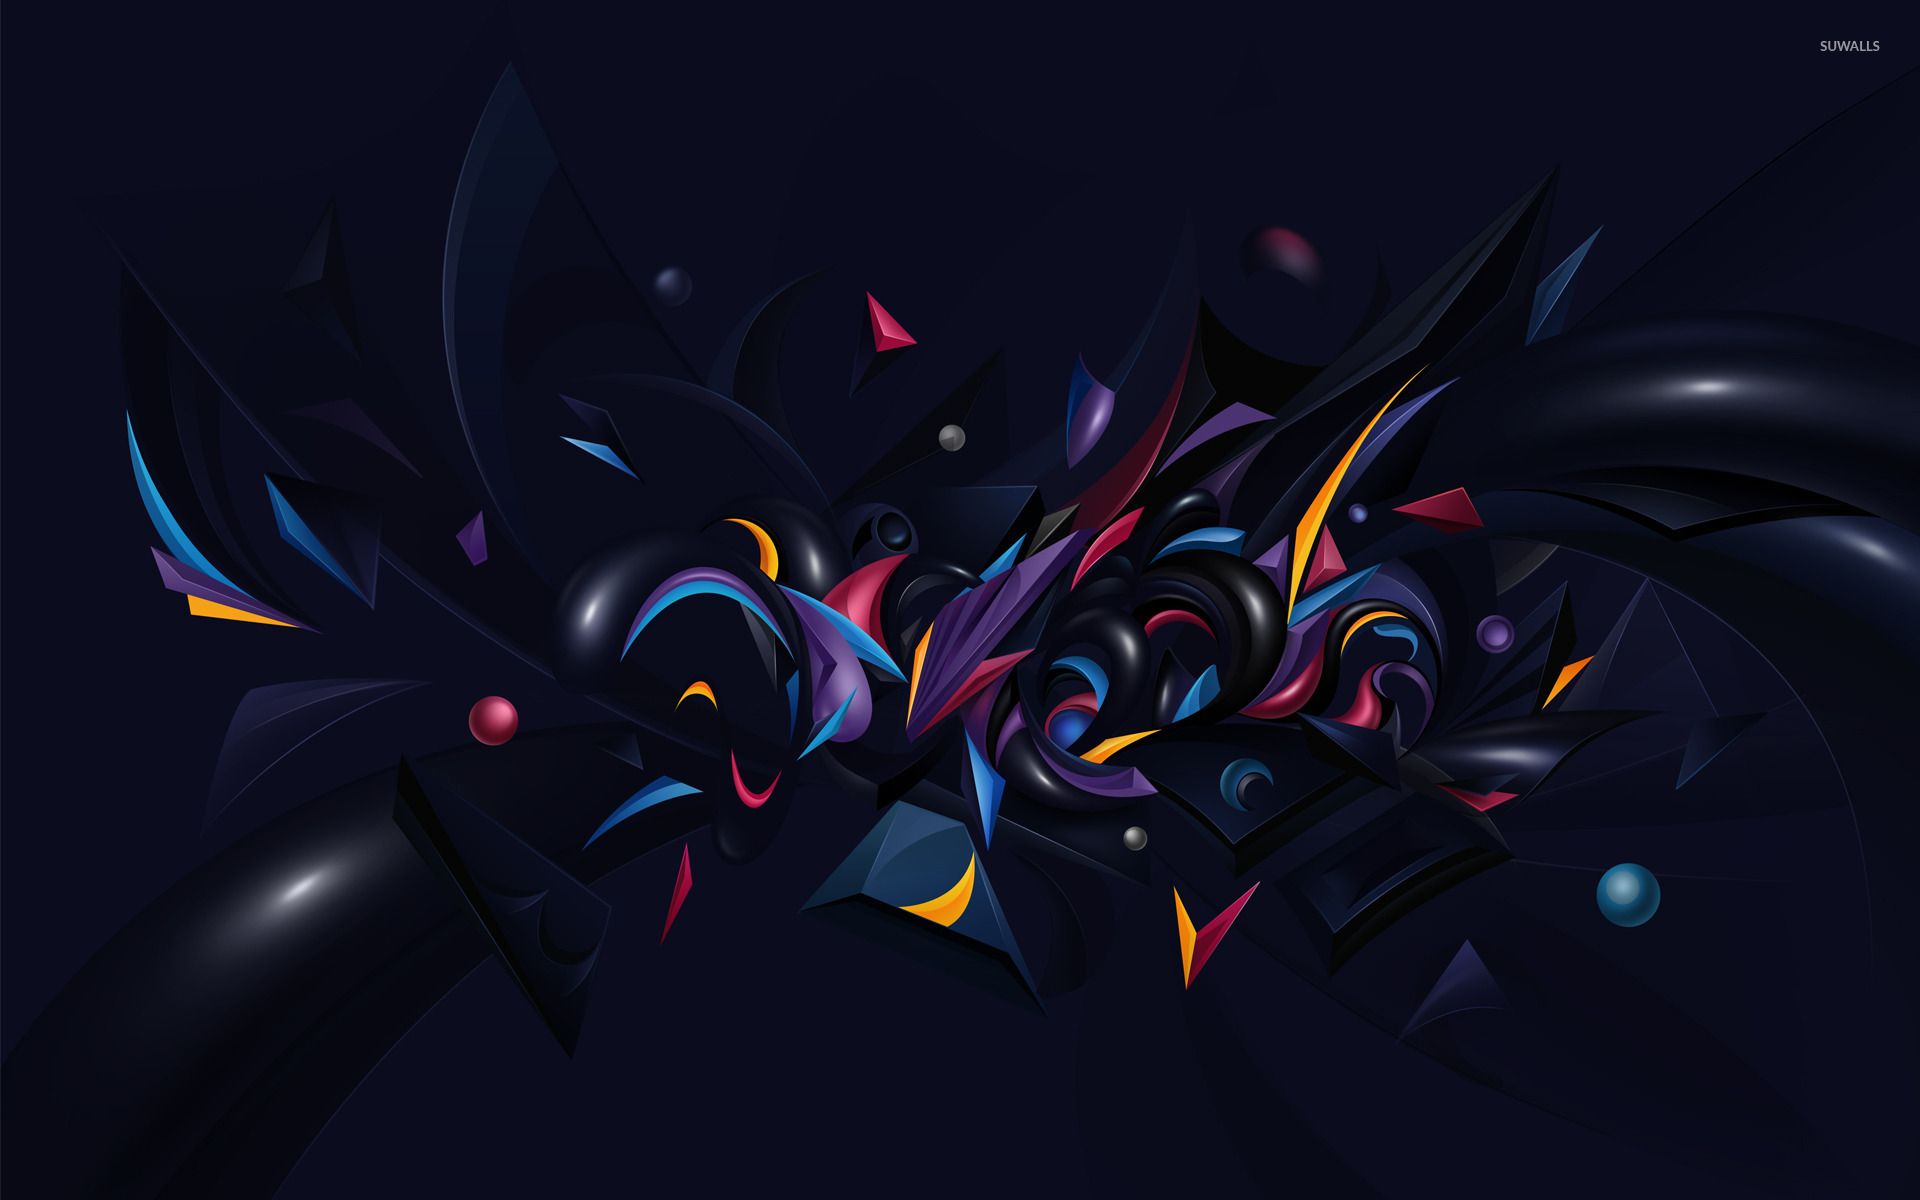 Colorful shapes on a dark background wallpaper wallpaper